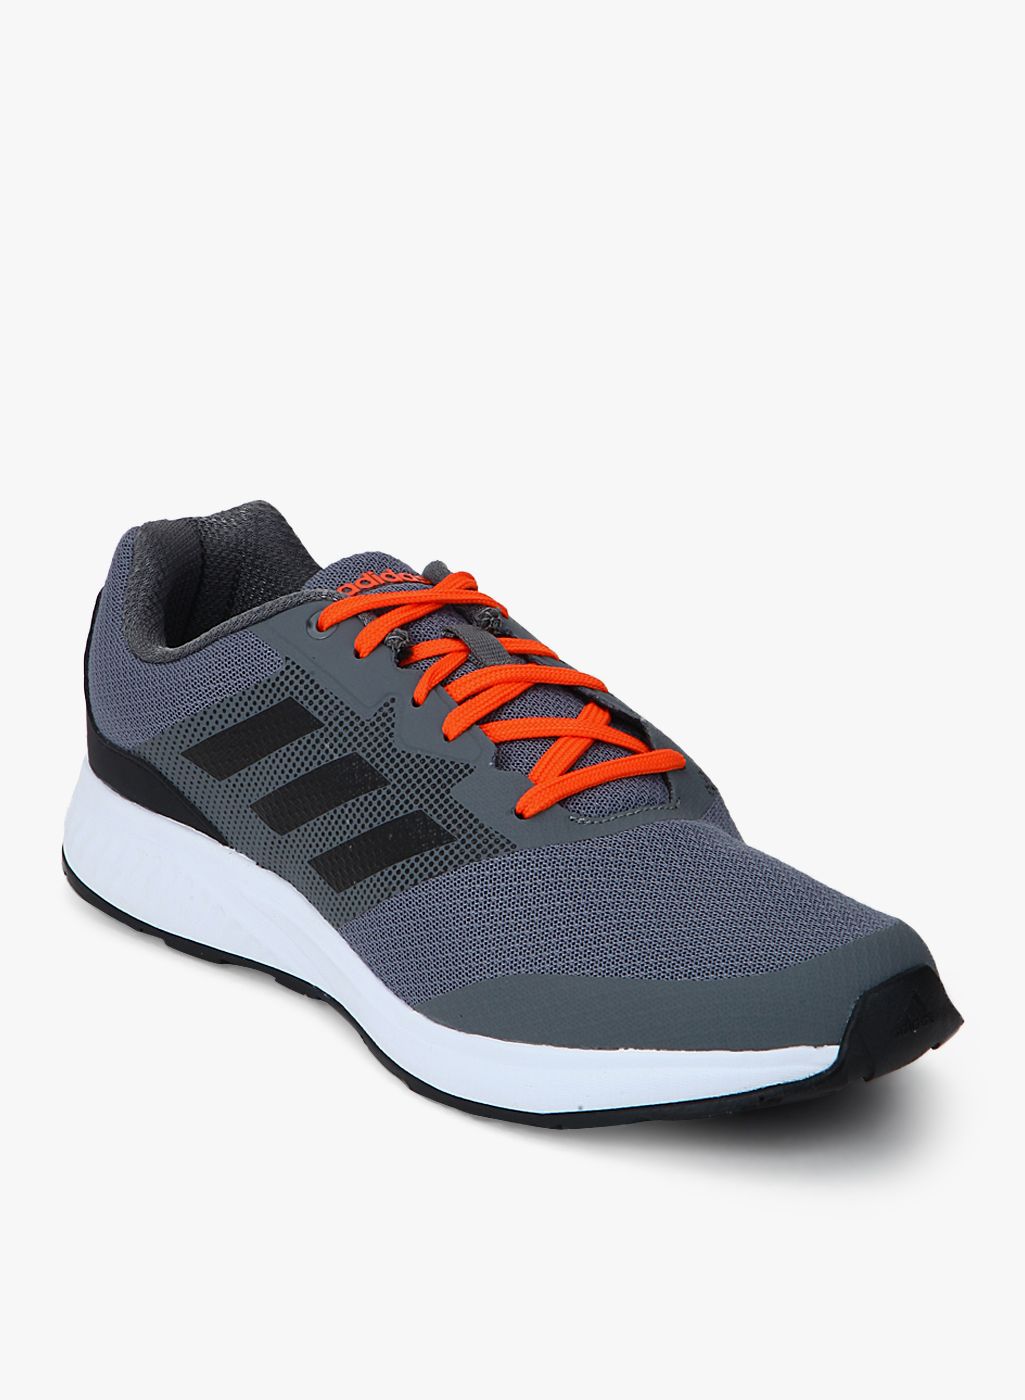 Adidas: Buy Adidas Shoes and Sports Accessories for men and women ...